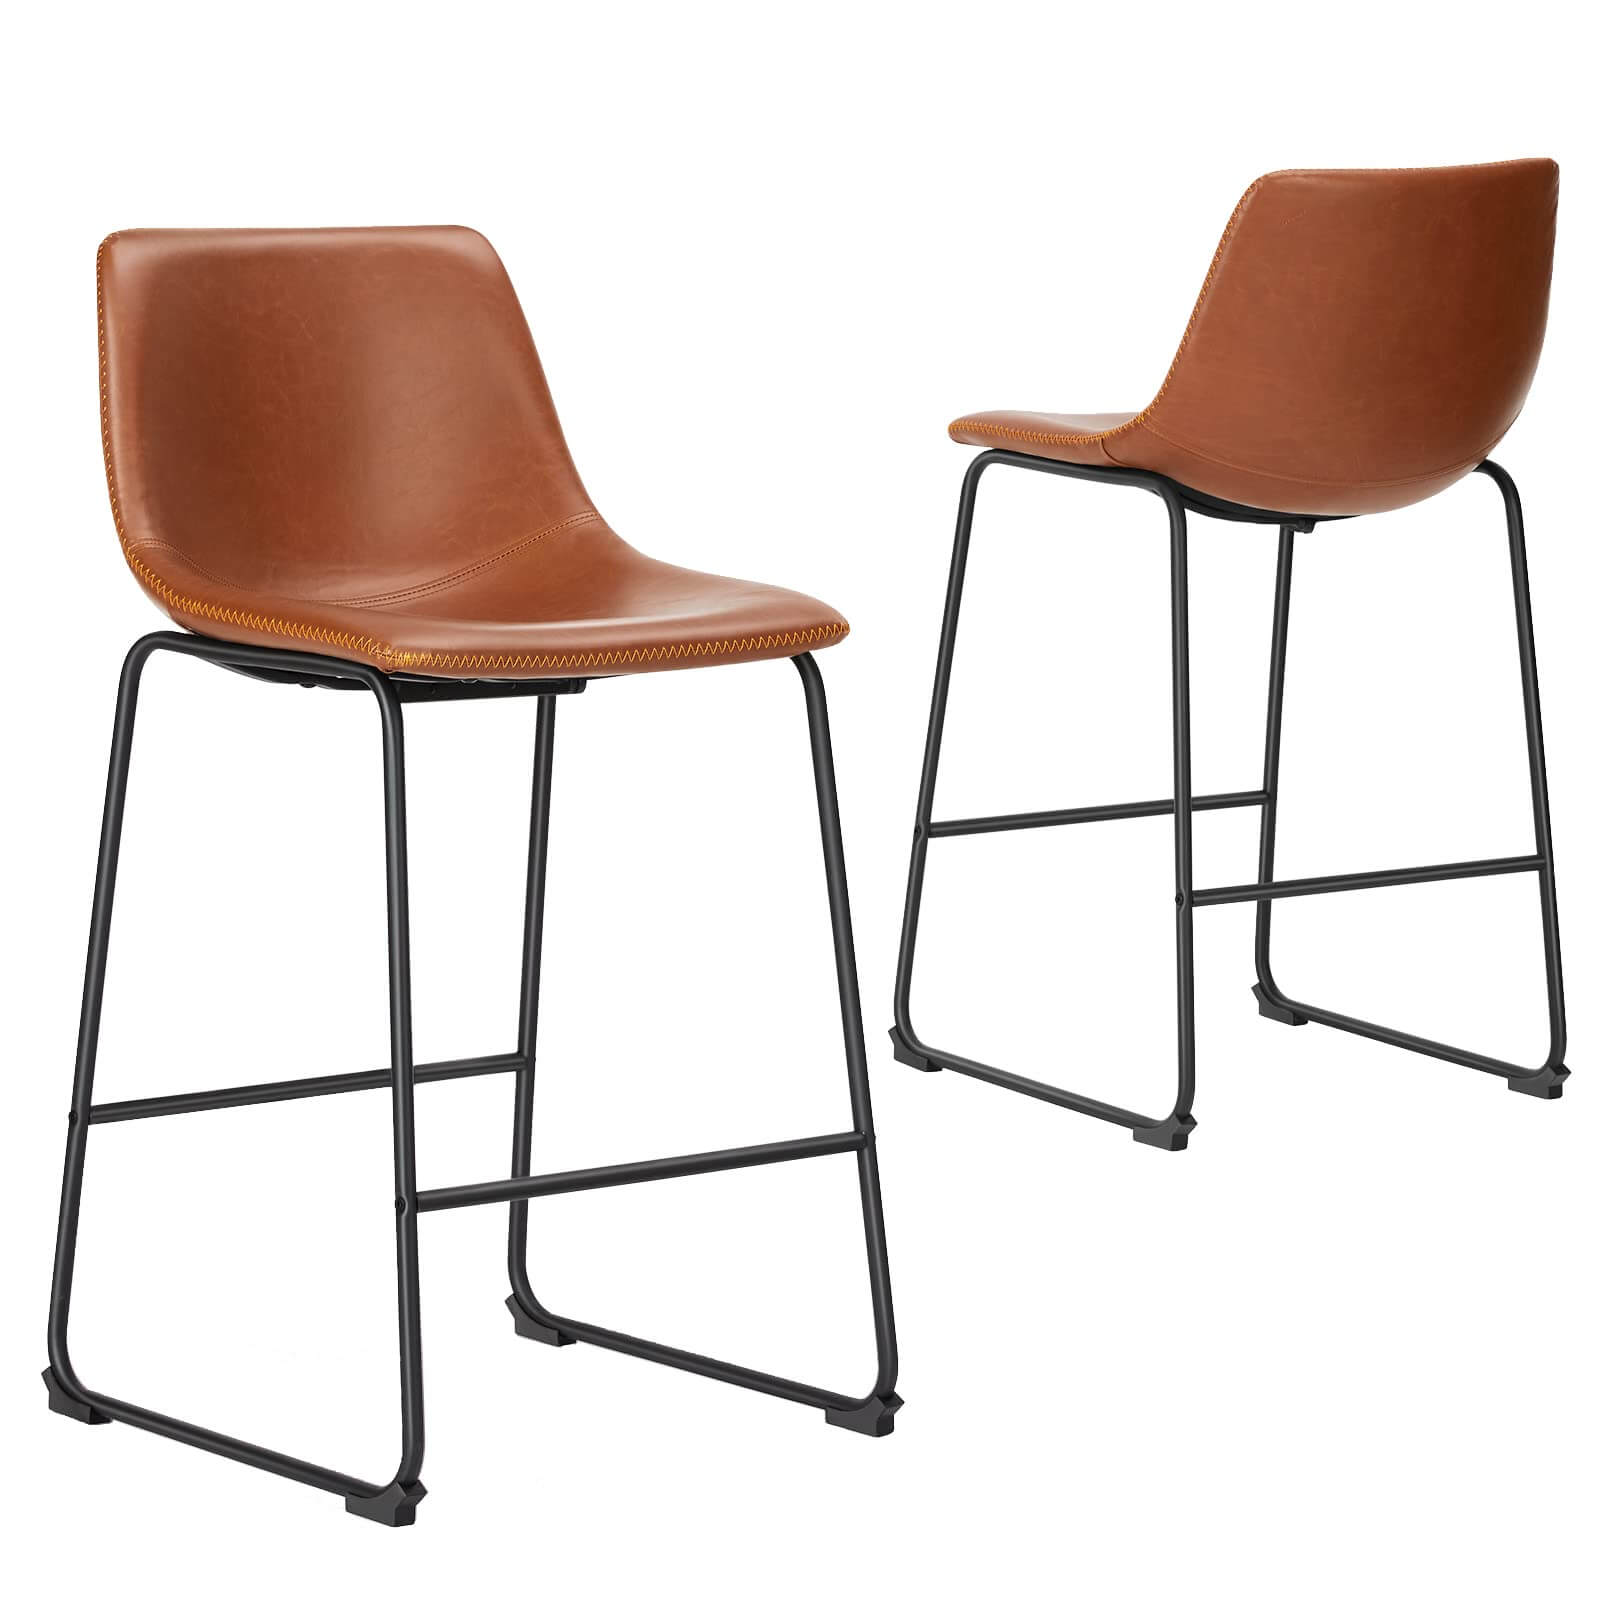 26-inch-dining-chairs#Color_Brown#Size_26 in